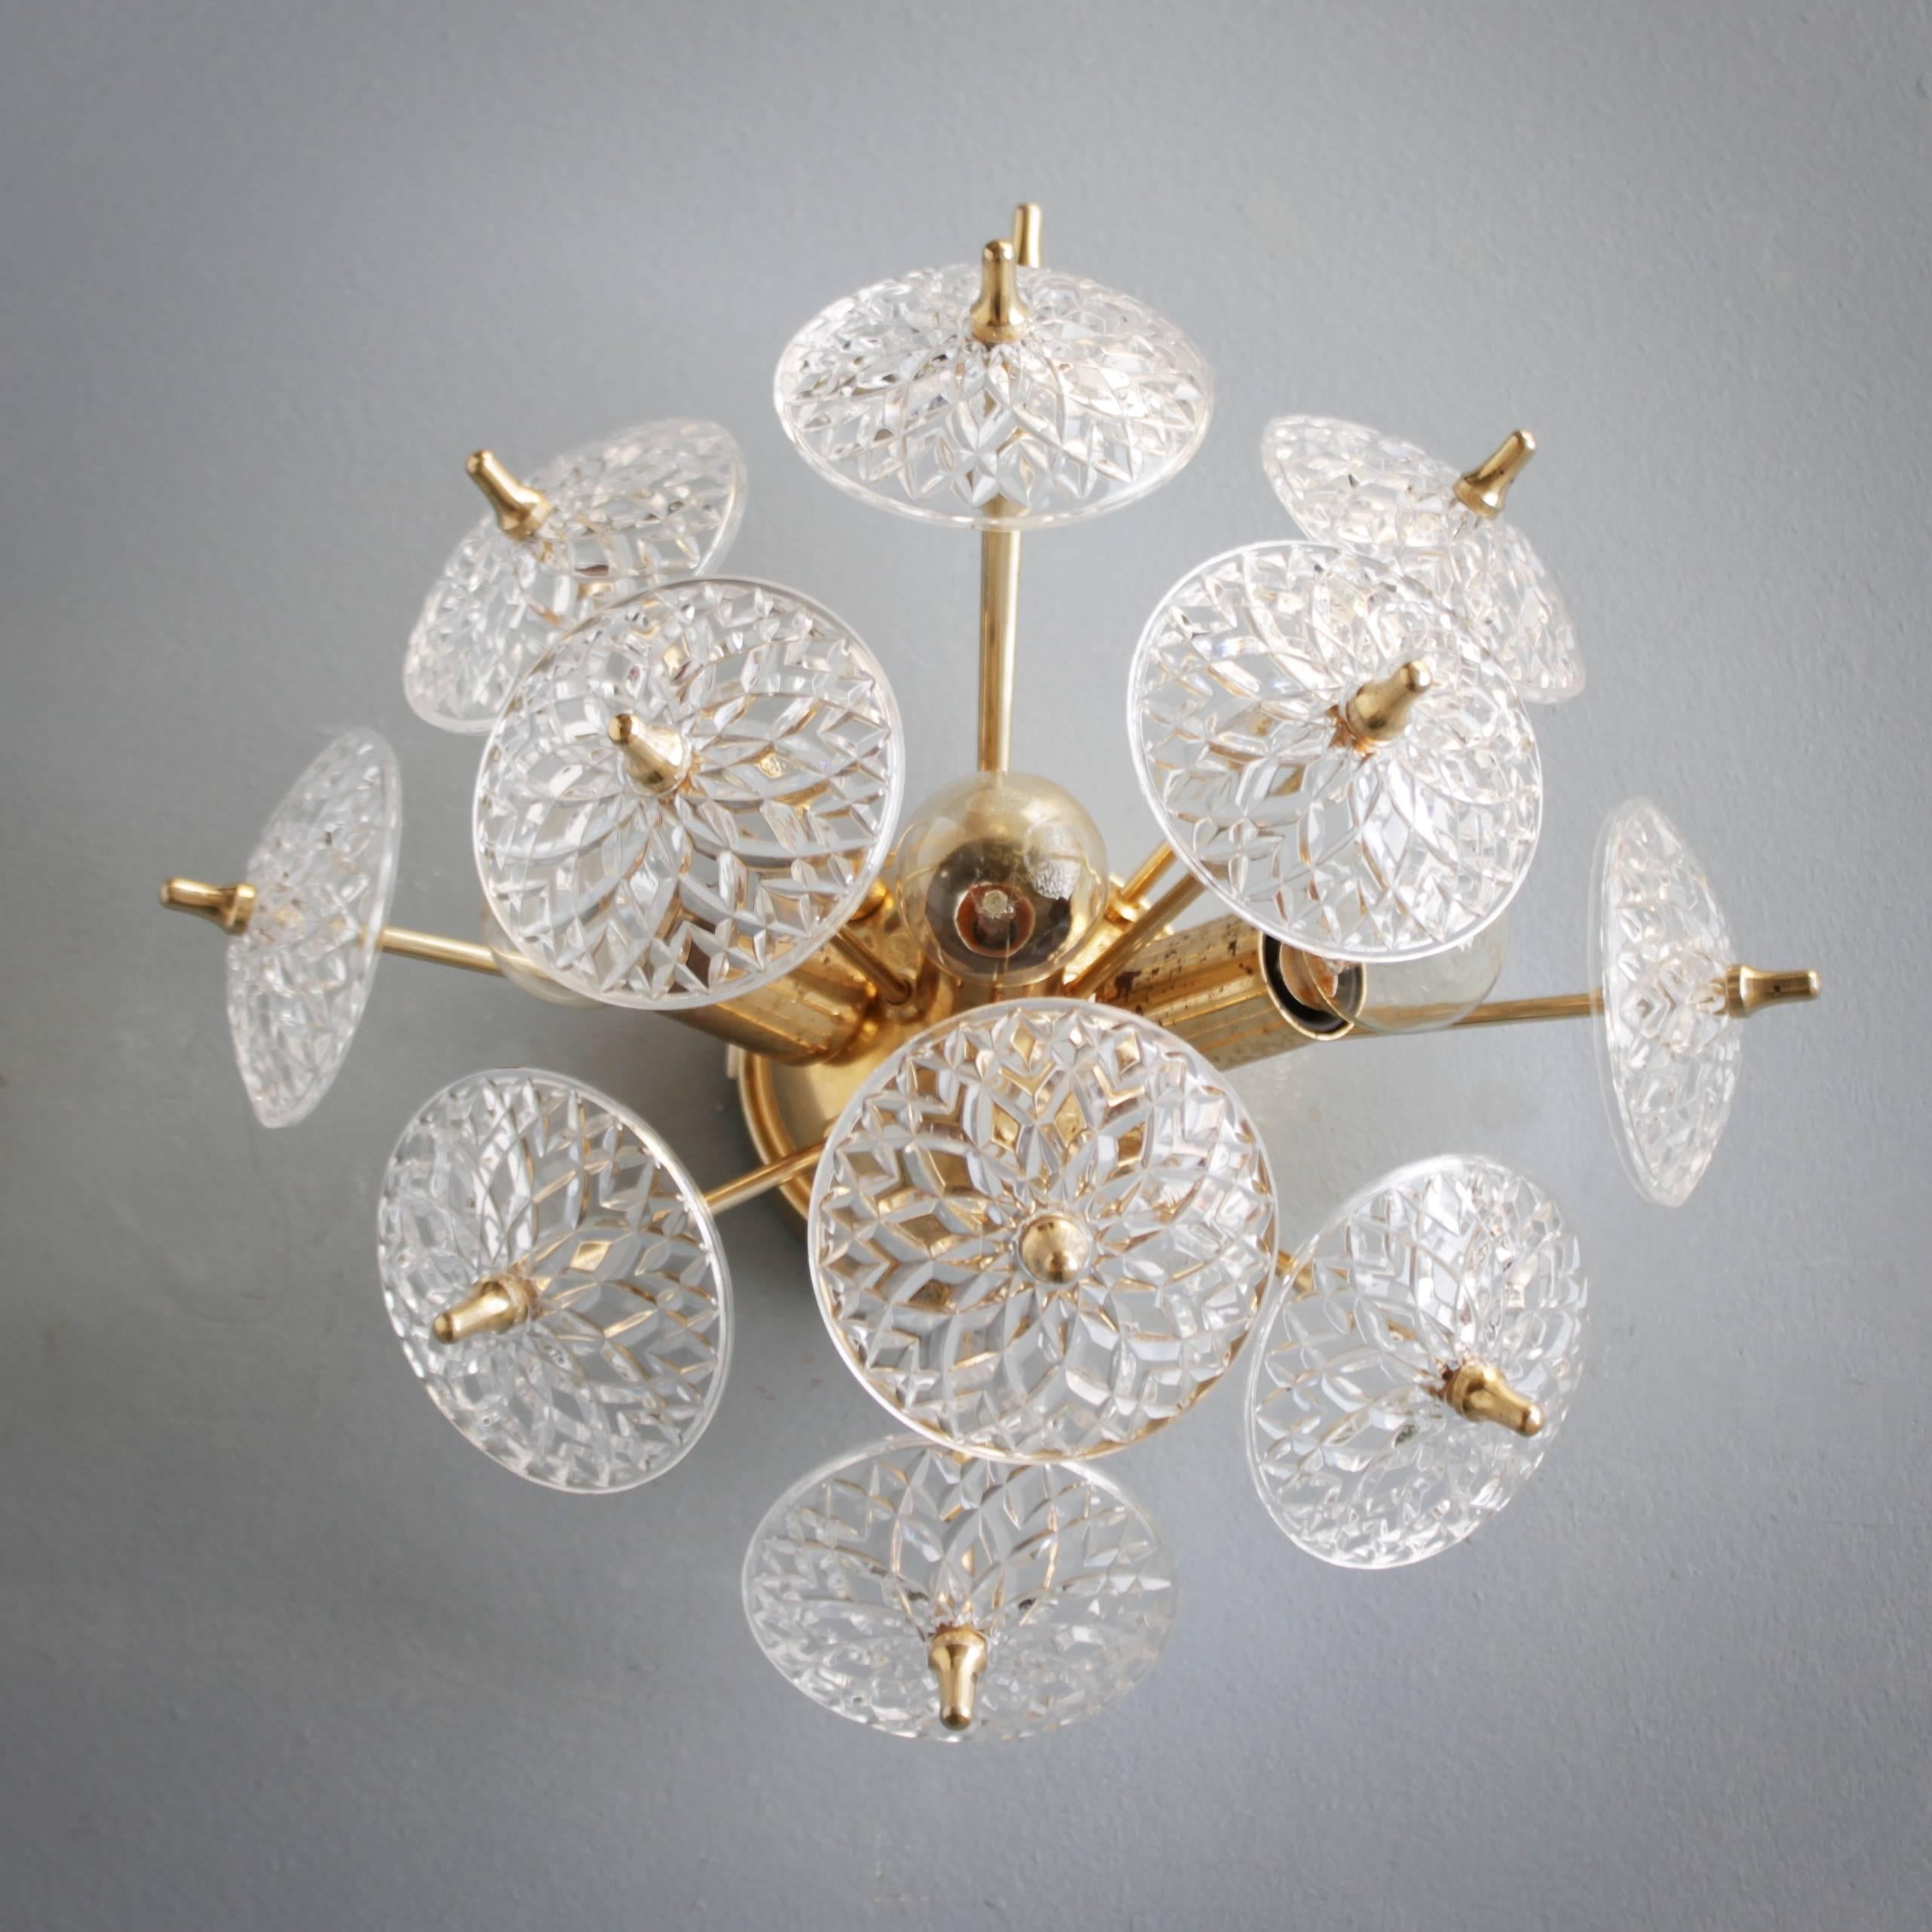 Wall light or sconce by Val Saint Lambert made in Belgium. Brass with crystal flowers and three-light bulbs.
Measures: Height 9.4 in. (24 cm), 13.3 inches diameter (34 cm).
We have a second one in stock.